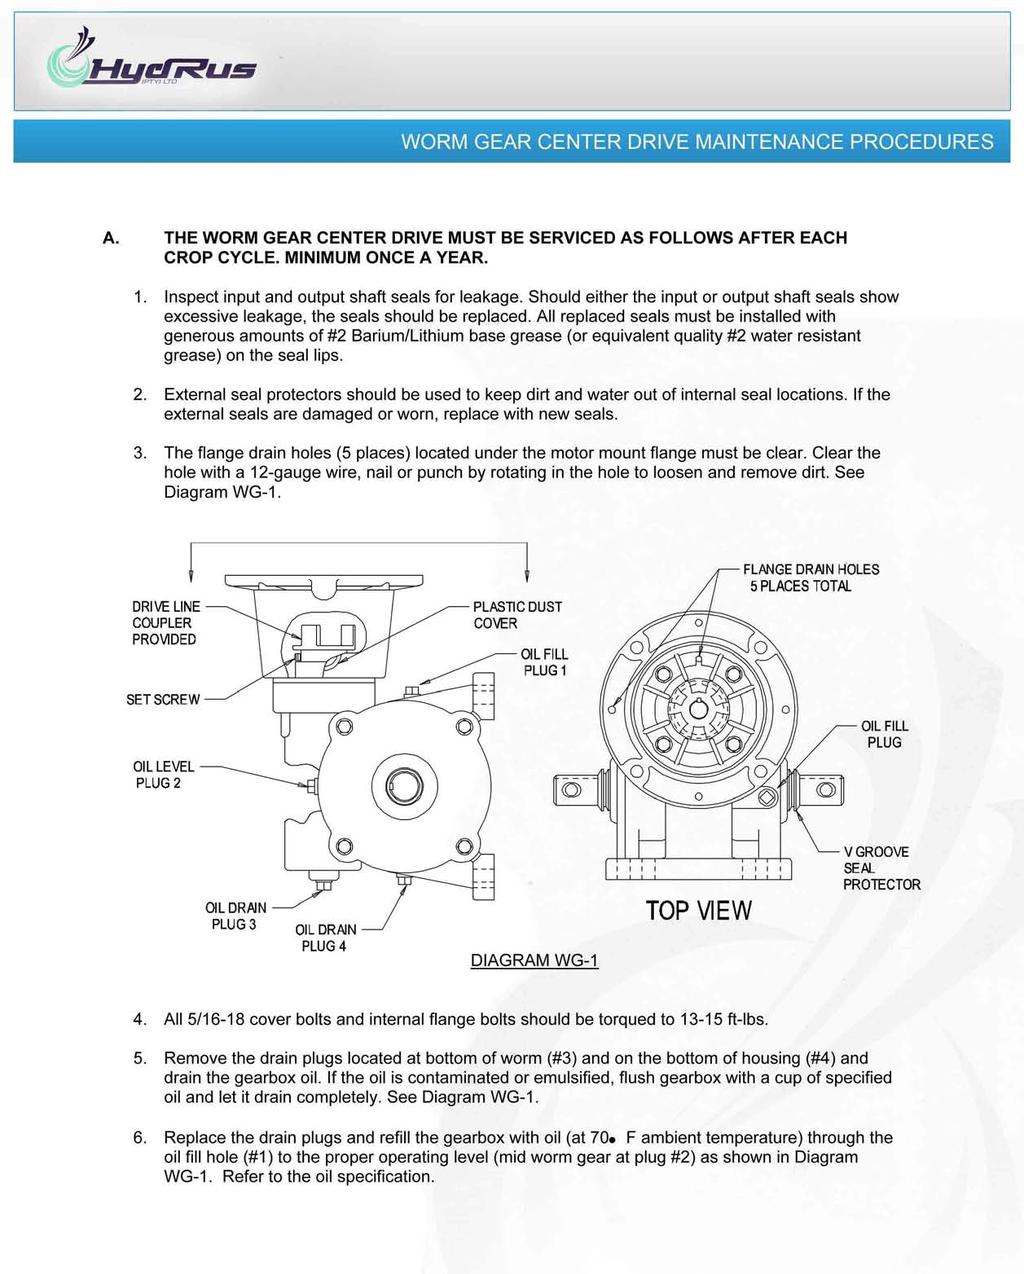 WORM GEAR CENTER DRIVE MAINTENANCE PROCEDURES A. THE WORM GEAR CENTER DRIVE MUST BE SERVICED AS FOLLOWS AFTER EACH CROP CYCLE. MINIMUM ONCE A YEAR. 1. Inspect input and output shaft seals for leakage.